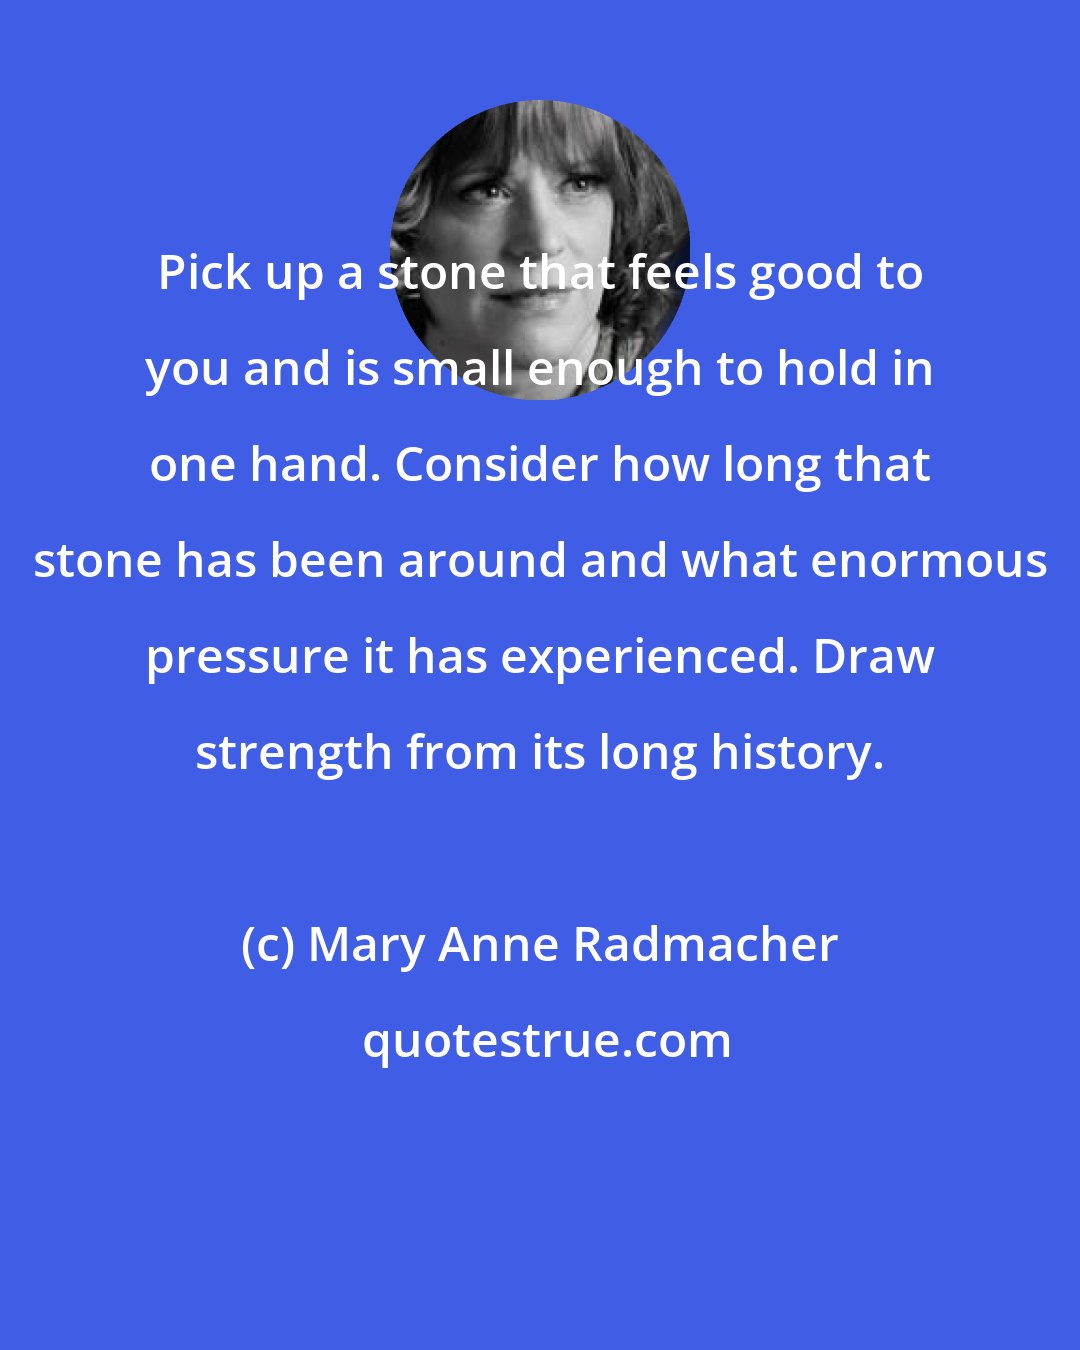 Mary Anne Radmacher: Pick up a stone that feels good to you and is small enough to hold in one hand. Consider how long that stone has been around and what enormous pressure it has experienced. Draw strength from its long history.